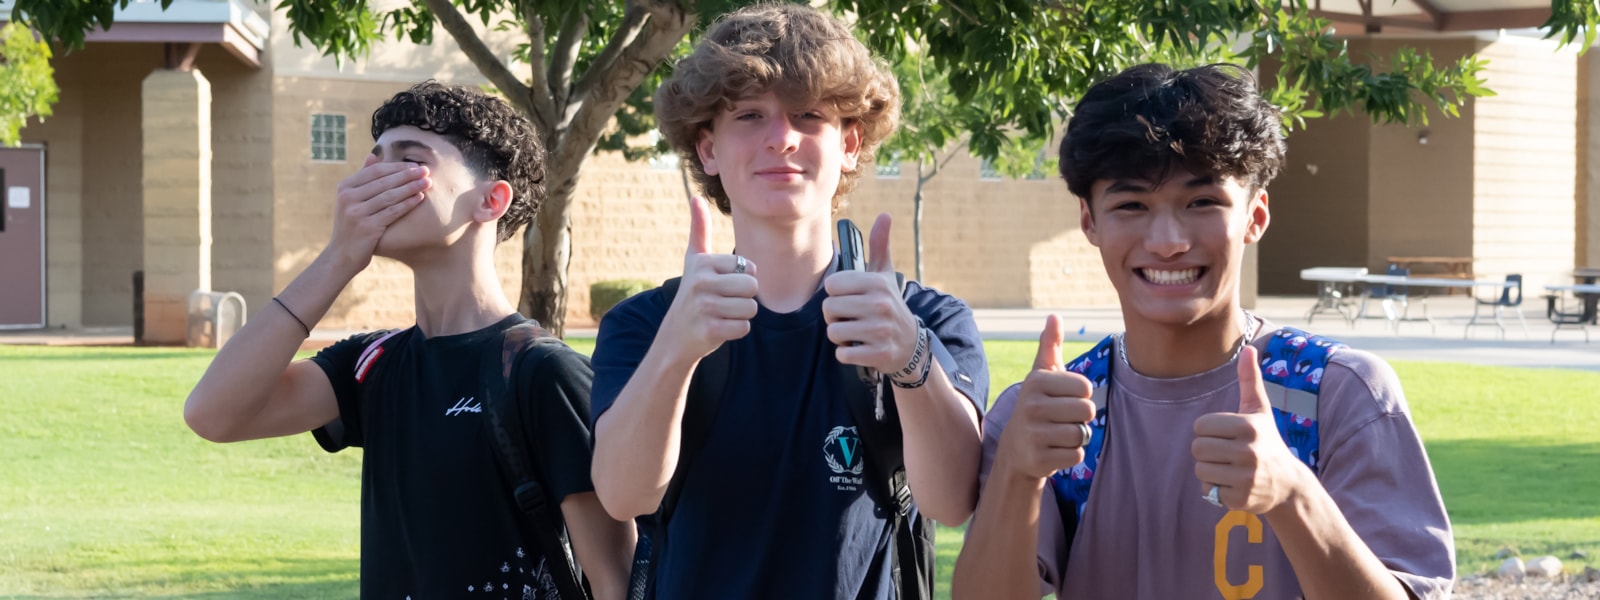 Students give a thumbs up